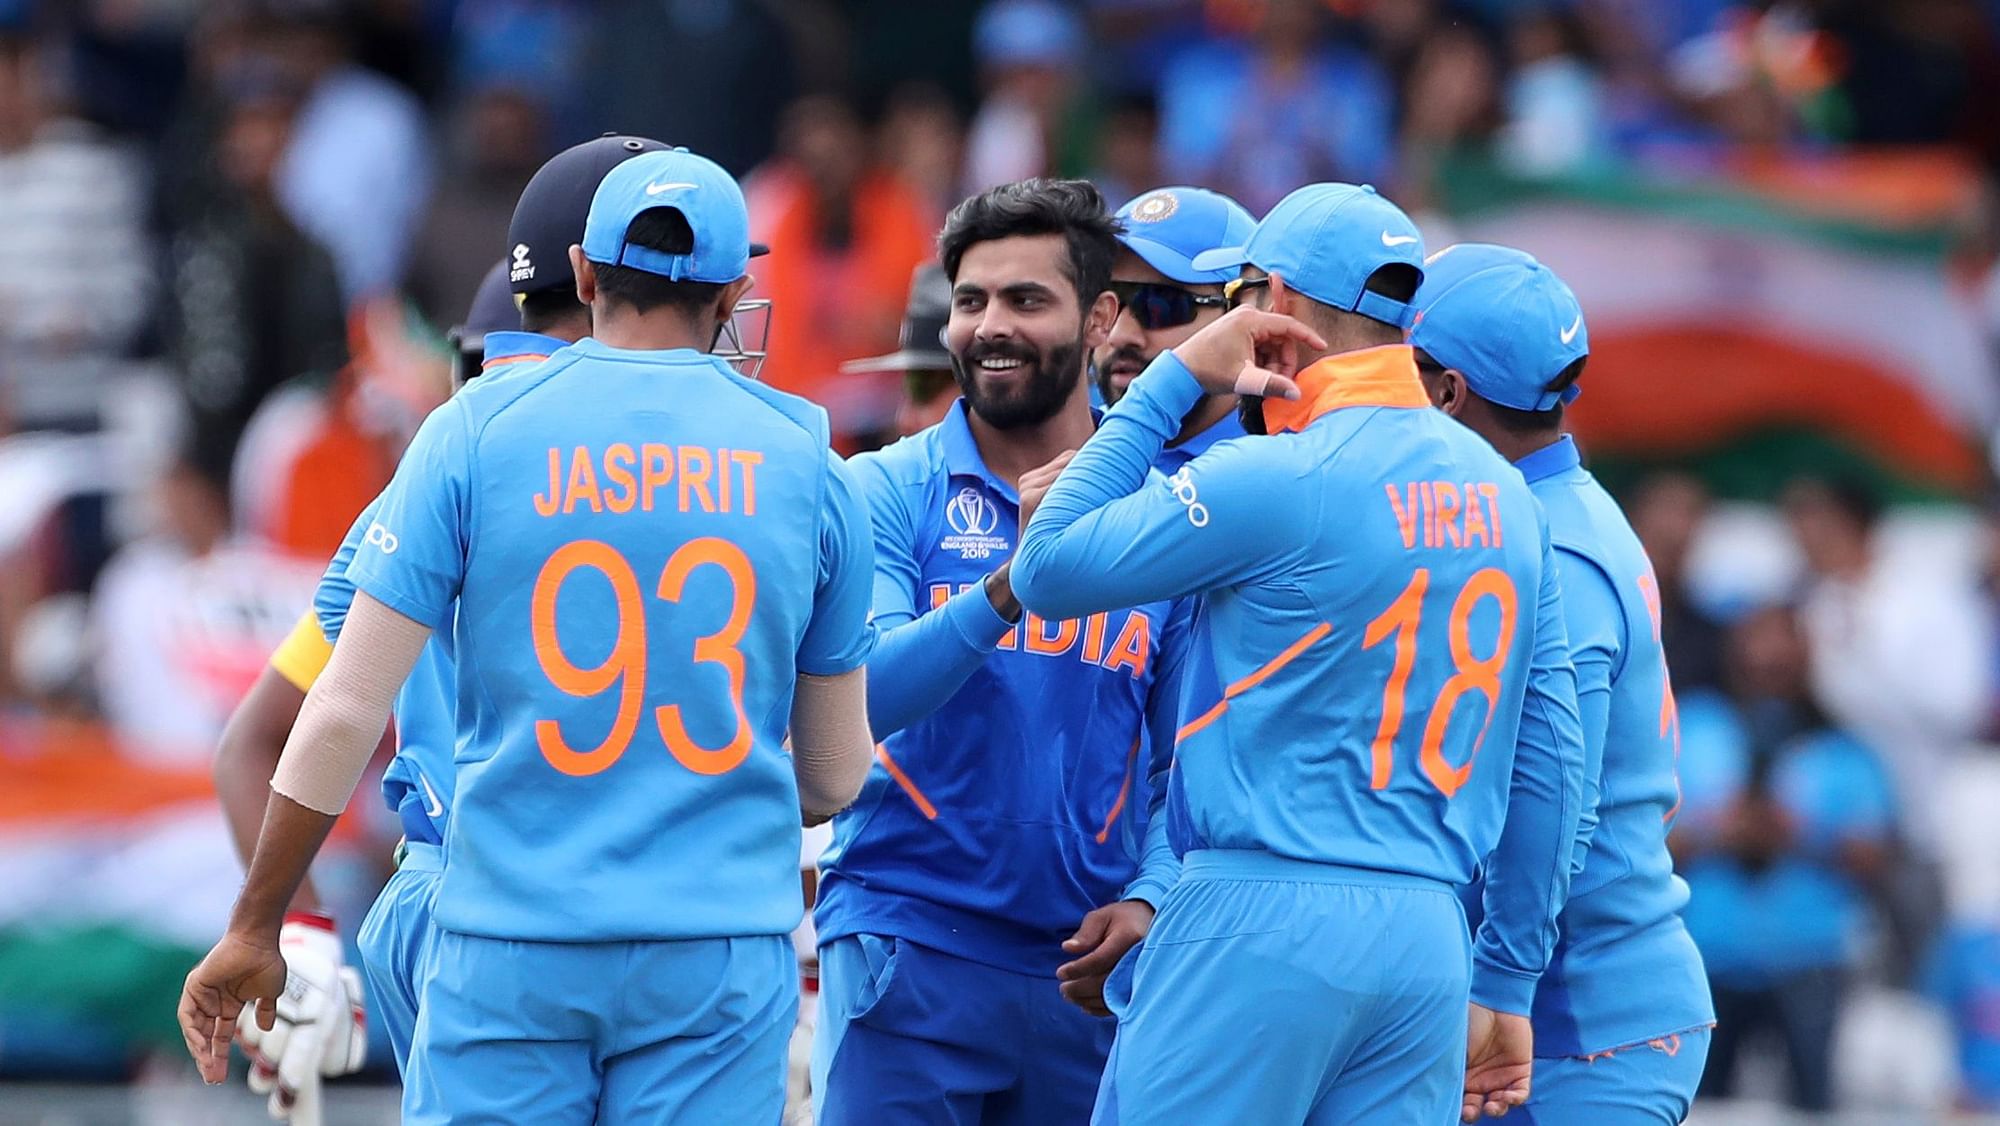 Ravindra Jadeja picked a wicket in his first over of the 2019 ICC World Cup.